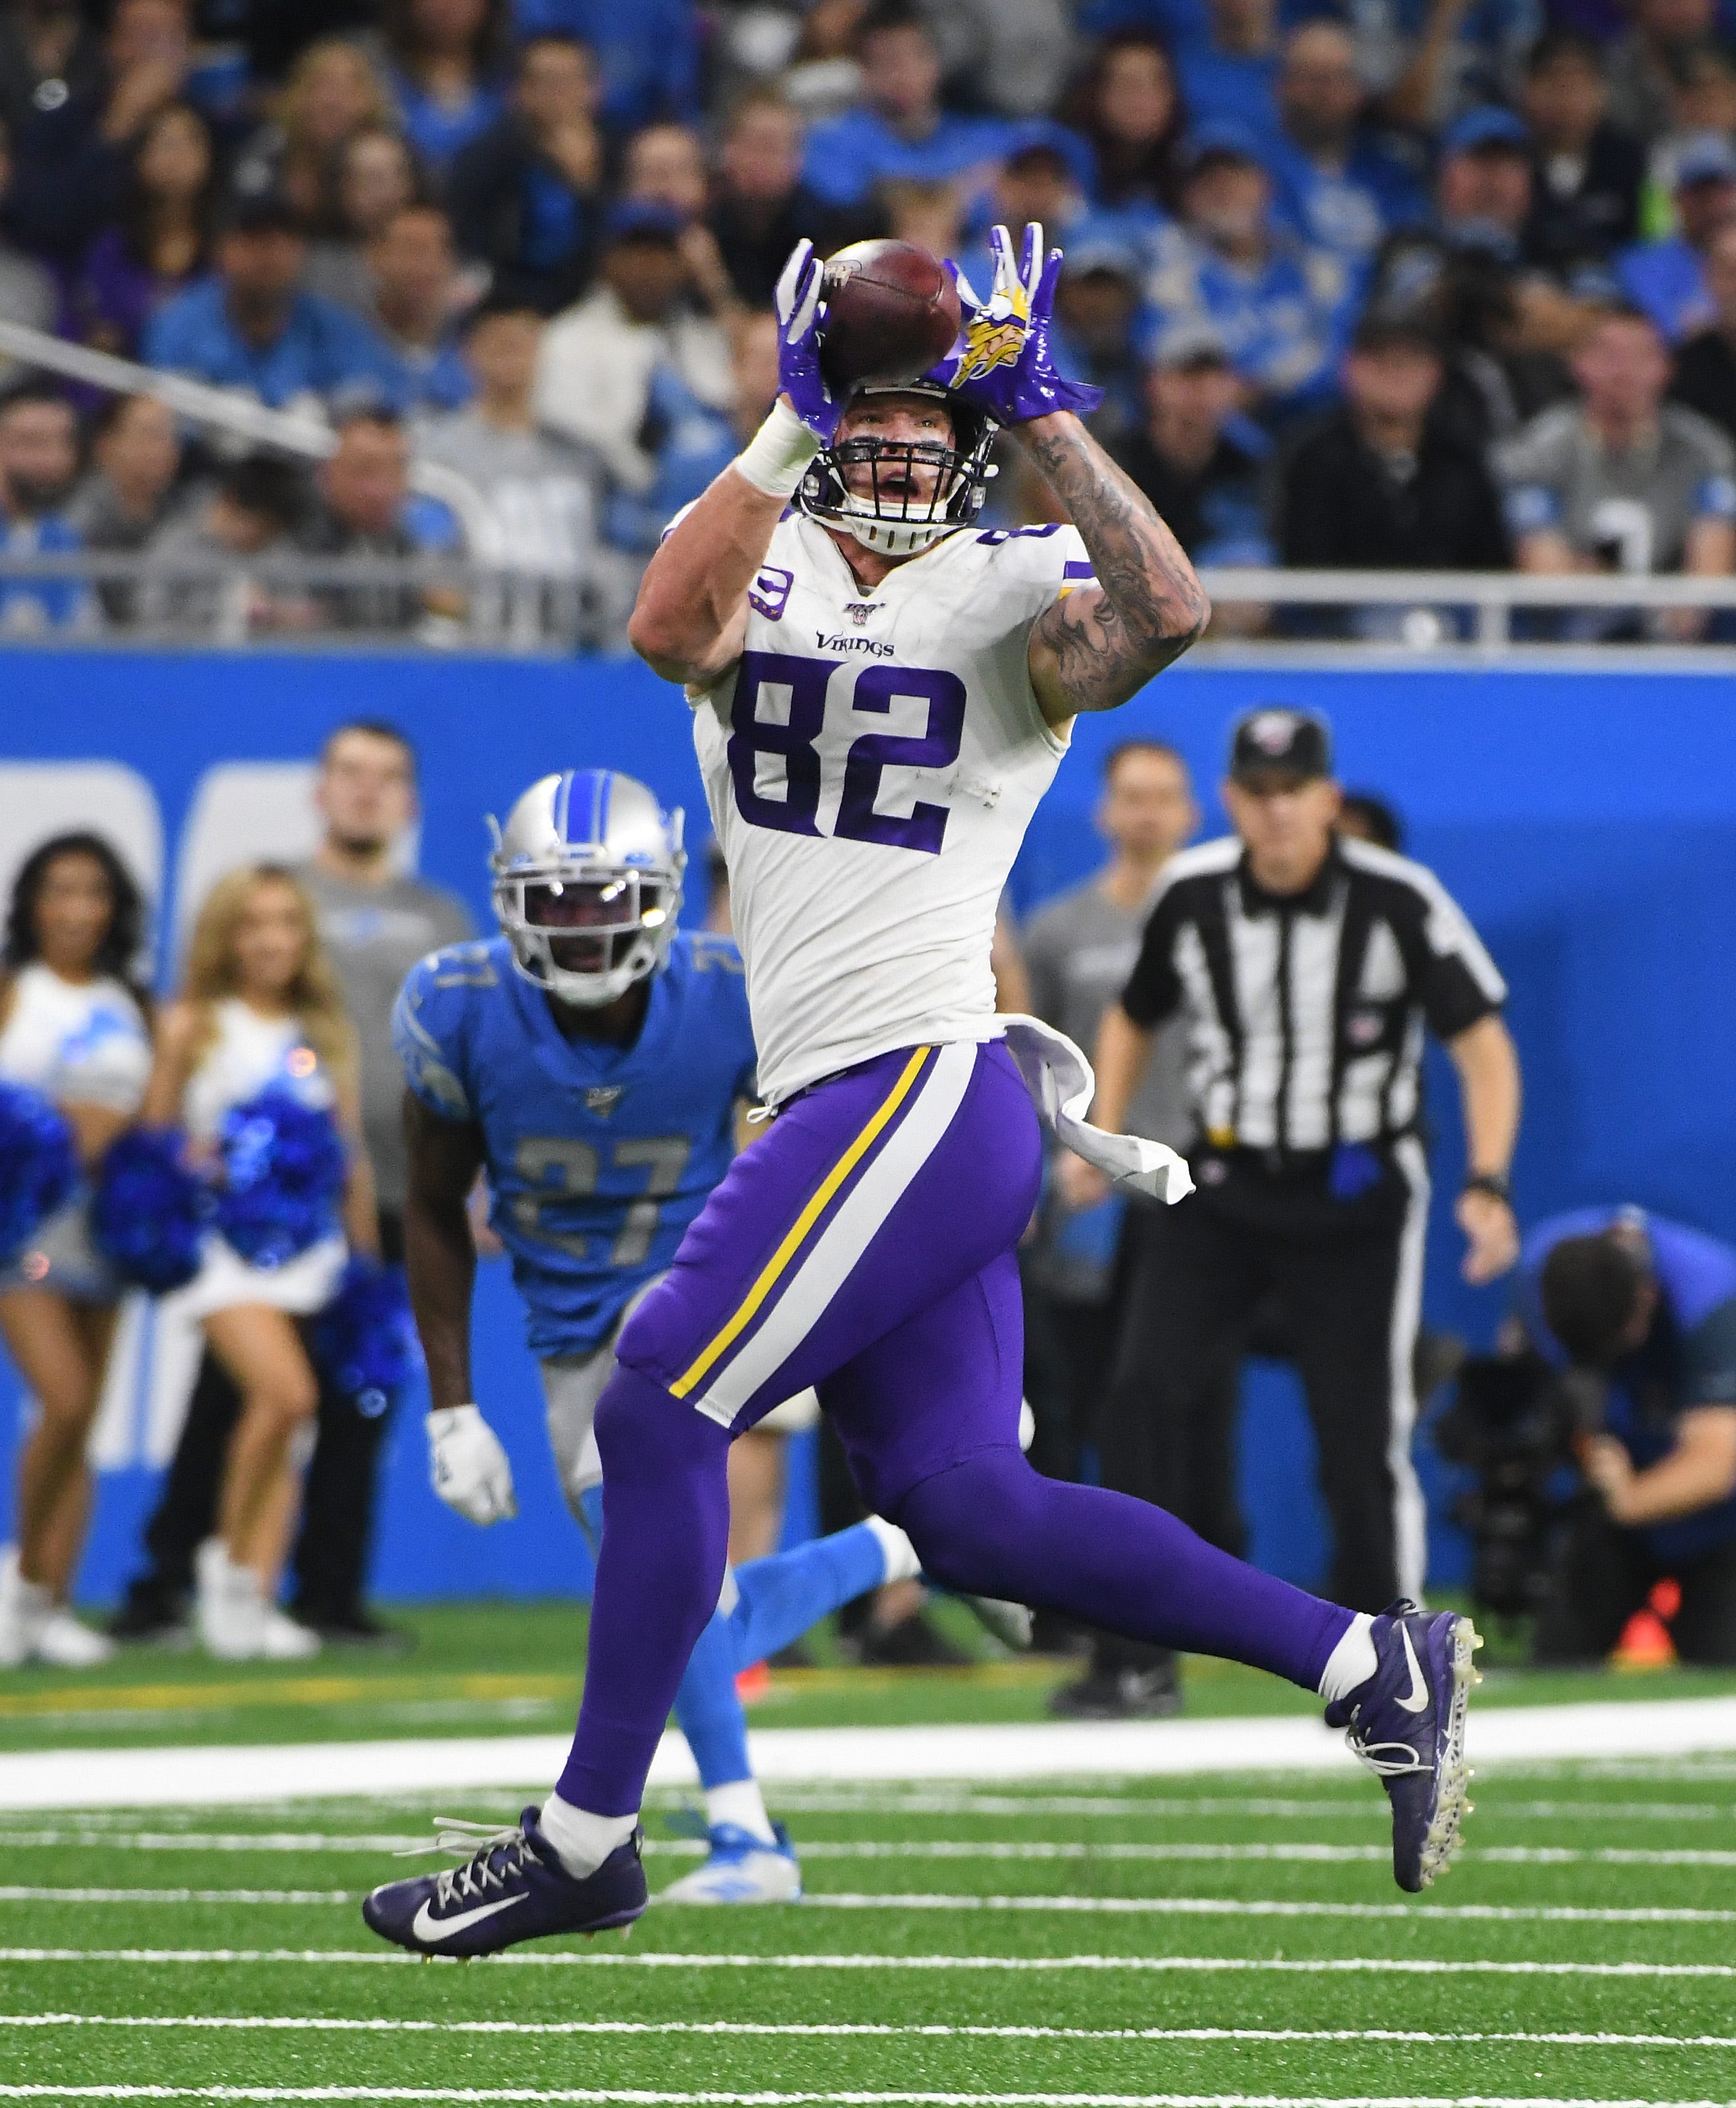 Vikings ' Kyle Rudolph gets an easy catch with the Lions ' defense playing loose in the second quarter.